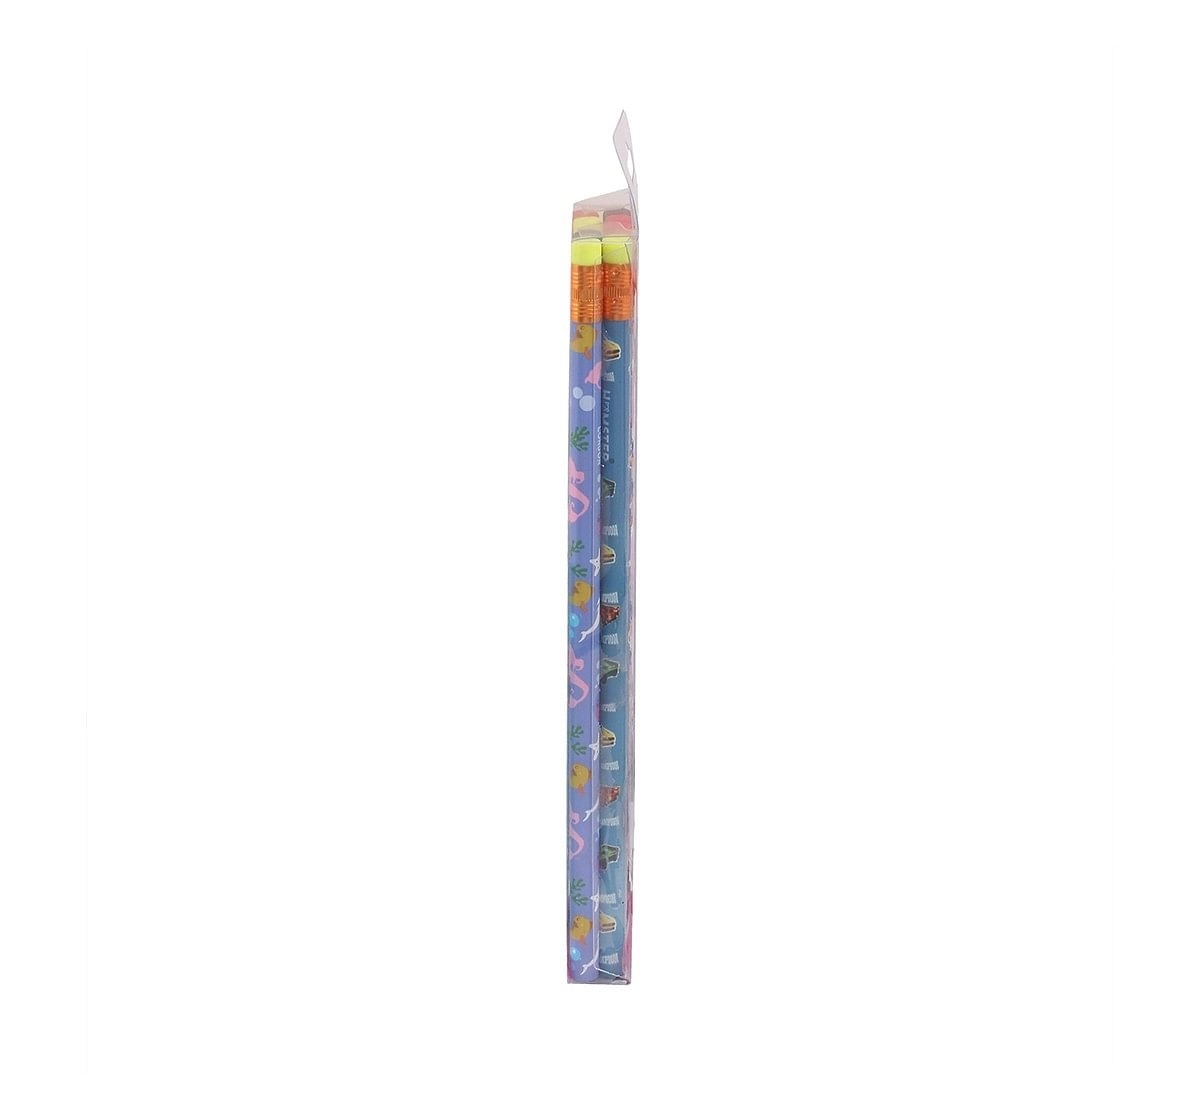 Hamster London Scented Pencils Set of 10 for Kids age 3Y+ 